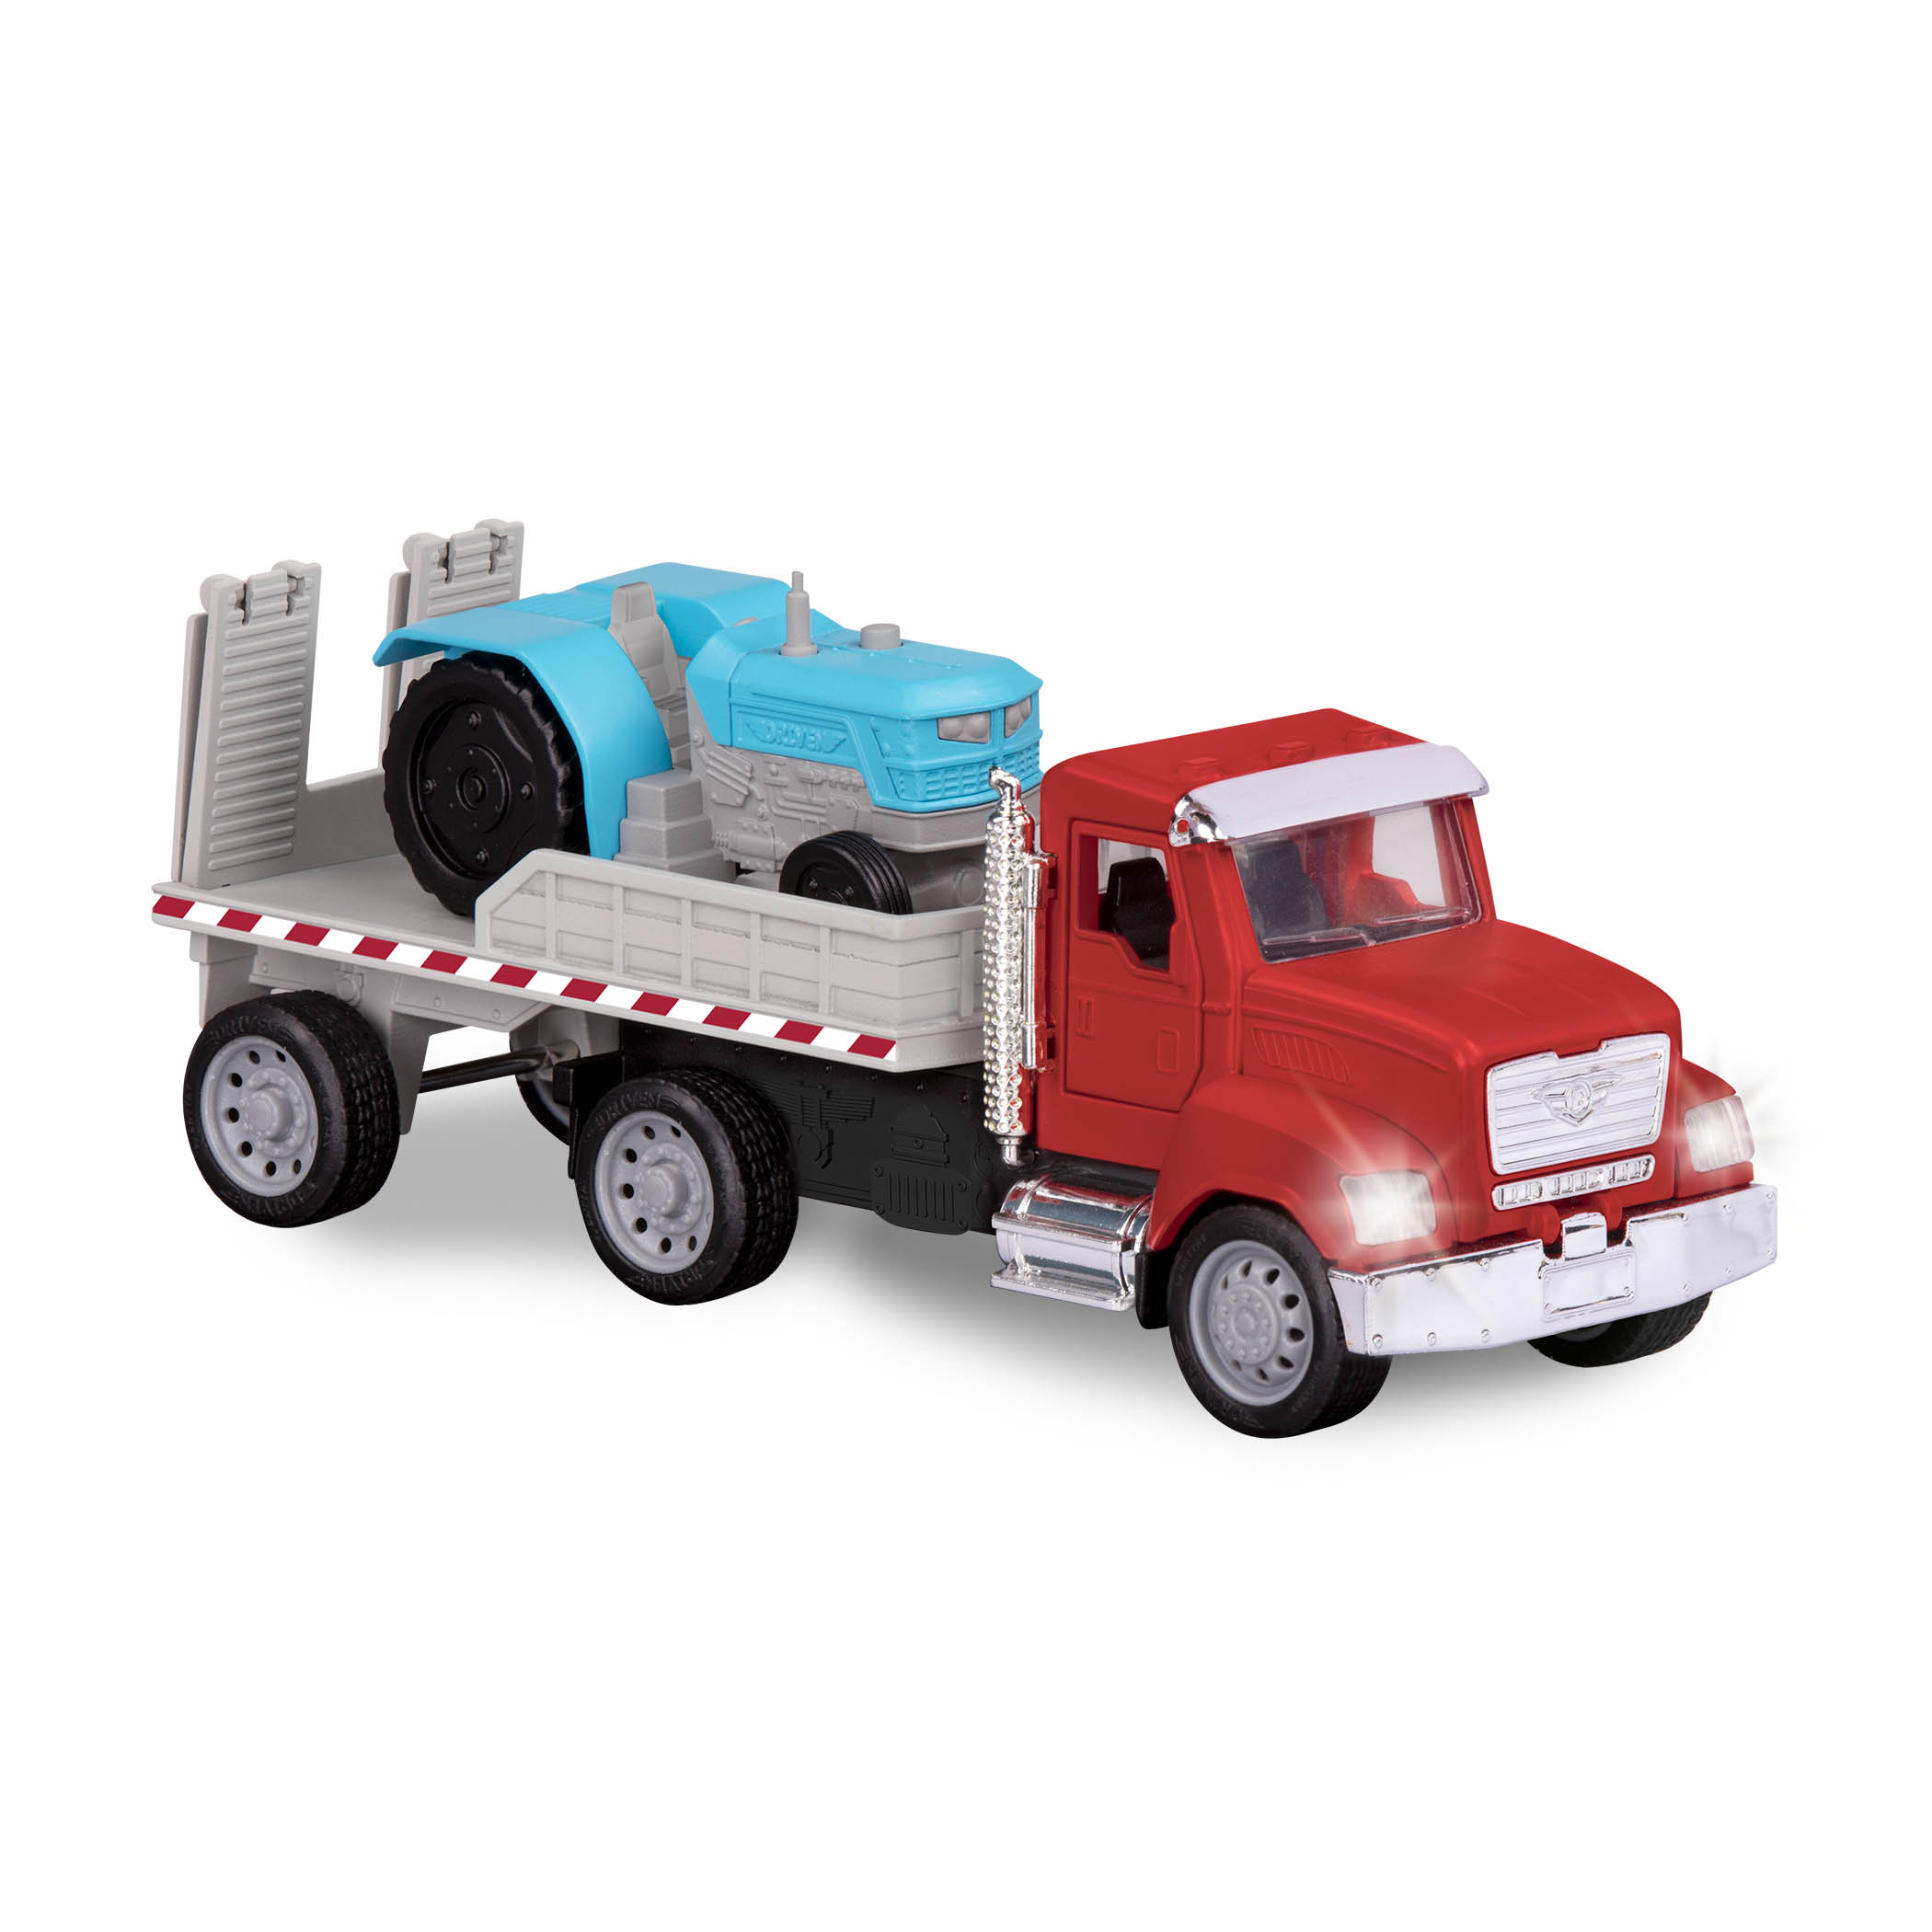 Micro Flatbed Truck WH1073Z Tractor Trucks and Construction Toys for Kids Aged 3 and Up Ramps Lights and Sounds Nylon/A 